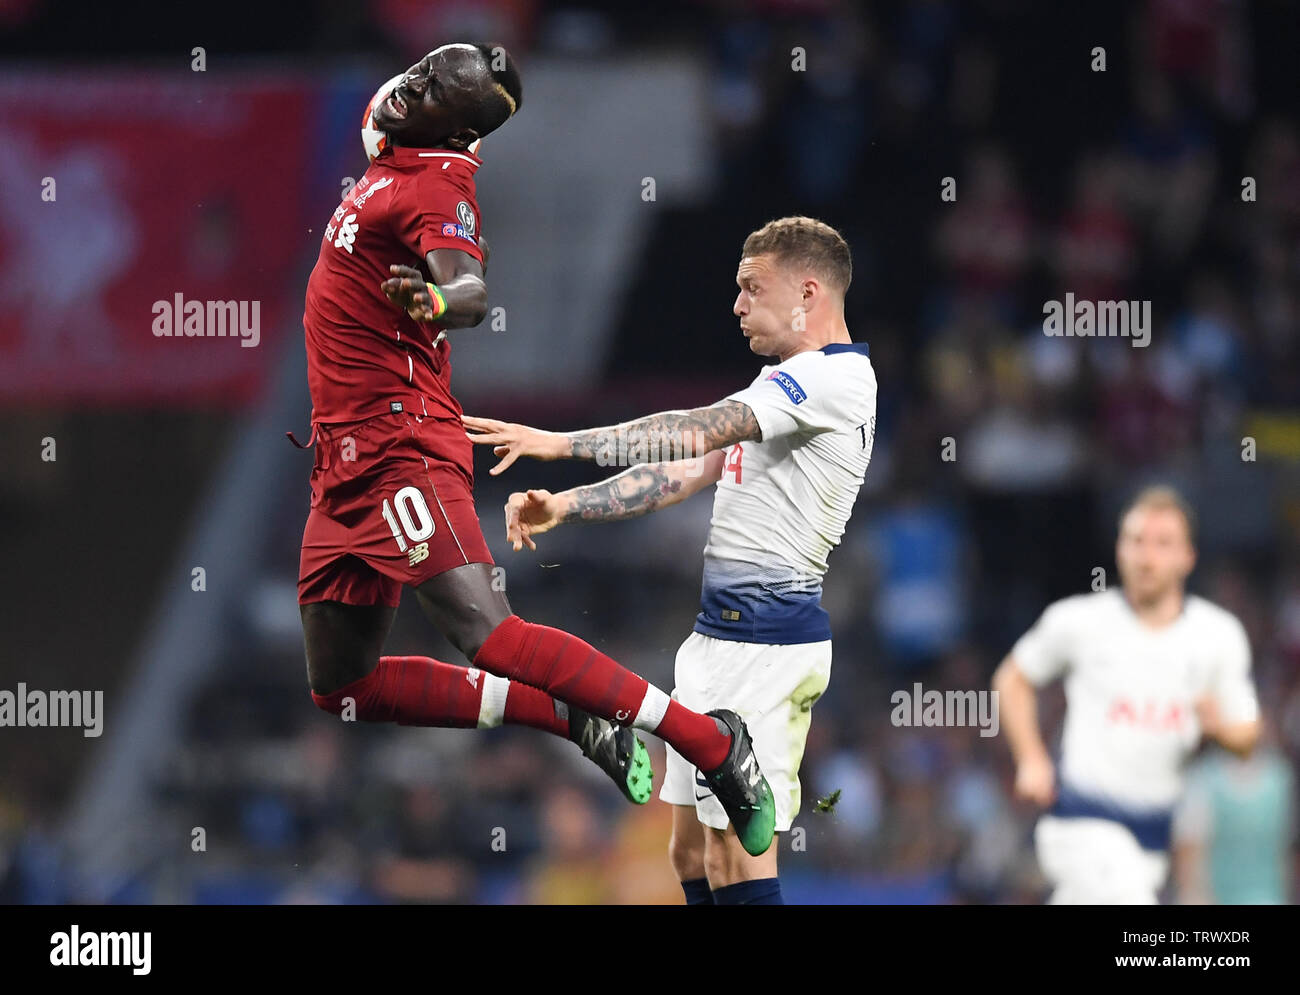 MADRID, SPAIN - JUNE 1, 2019: Sadio Mane of Liverpool and Kieran Trippier of Tottenham pictured during the 2018/19 UEFA Champions League Final between Tottenham Hotspur (England) and Liverpool FC (England) at Wanda Metropolitano. Stock Photo